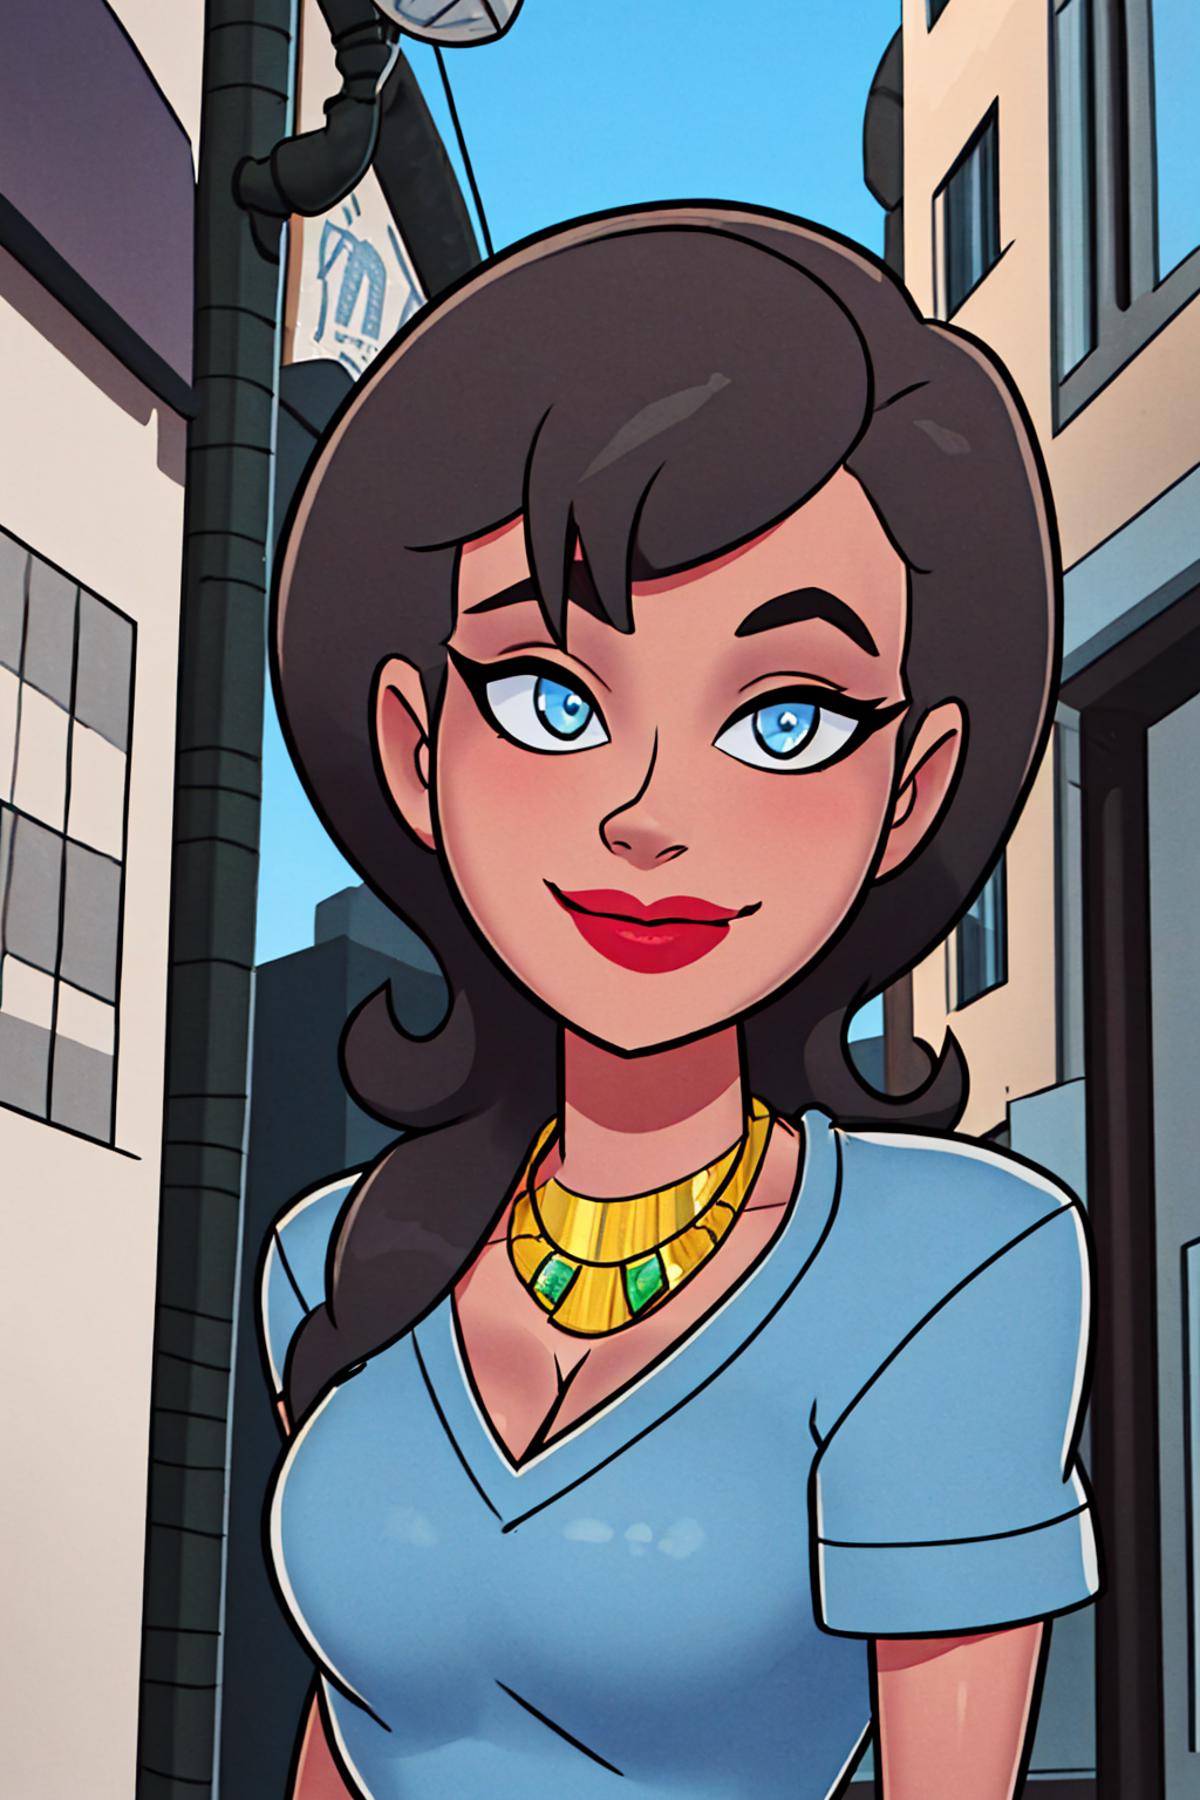 A cartoon character wearing a necklace and looking happy.